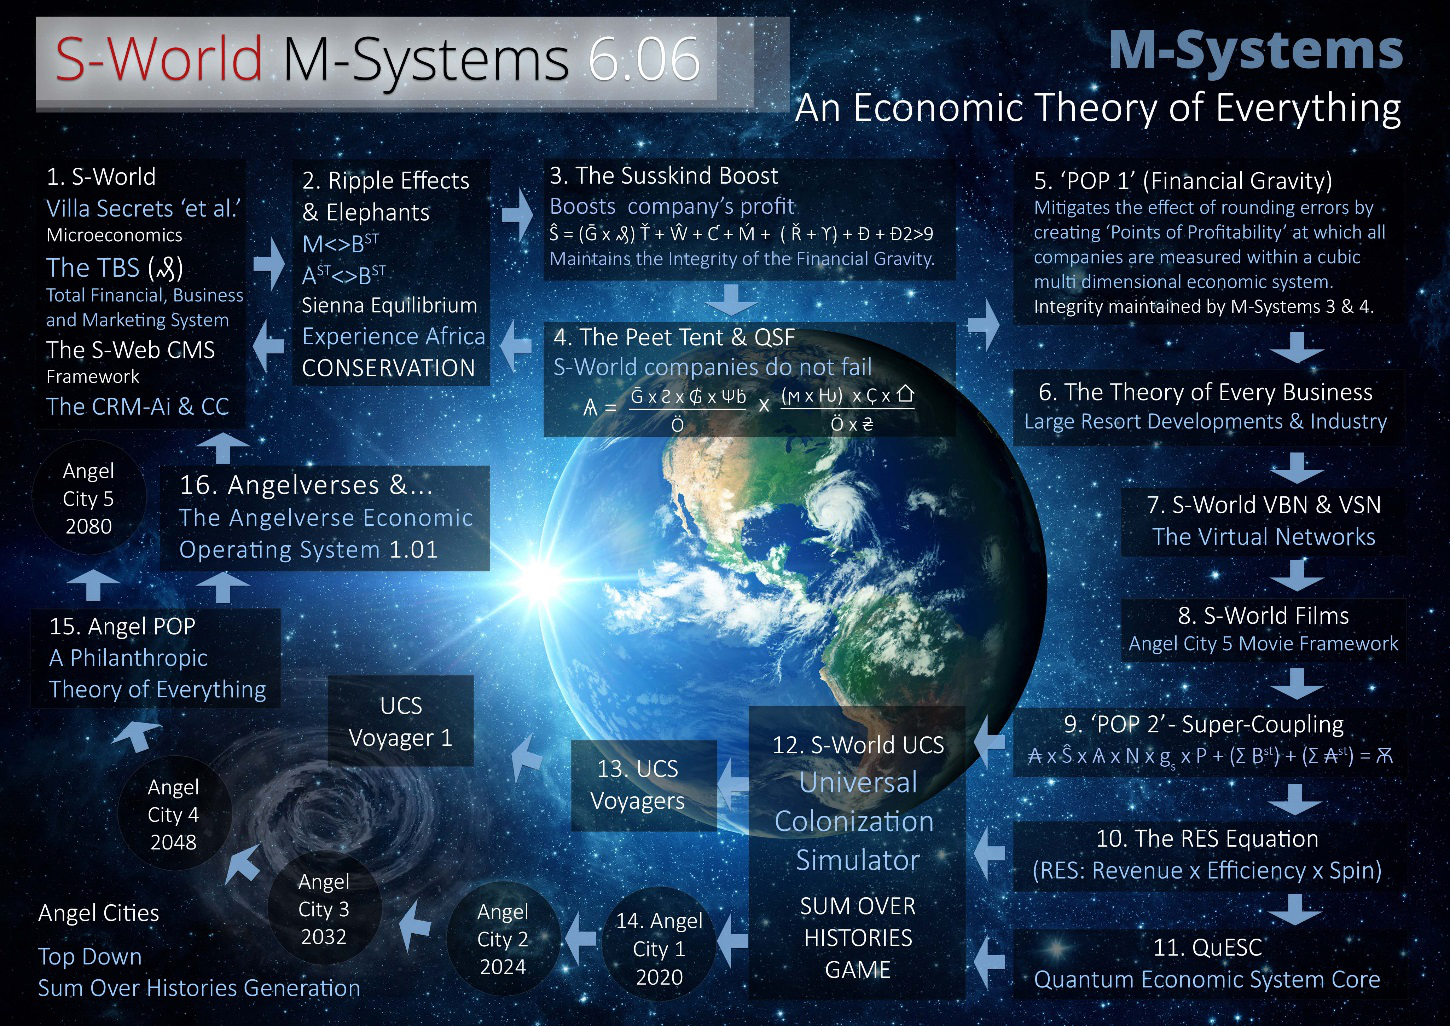 S-World M-Systems